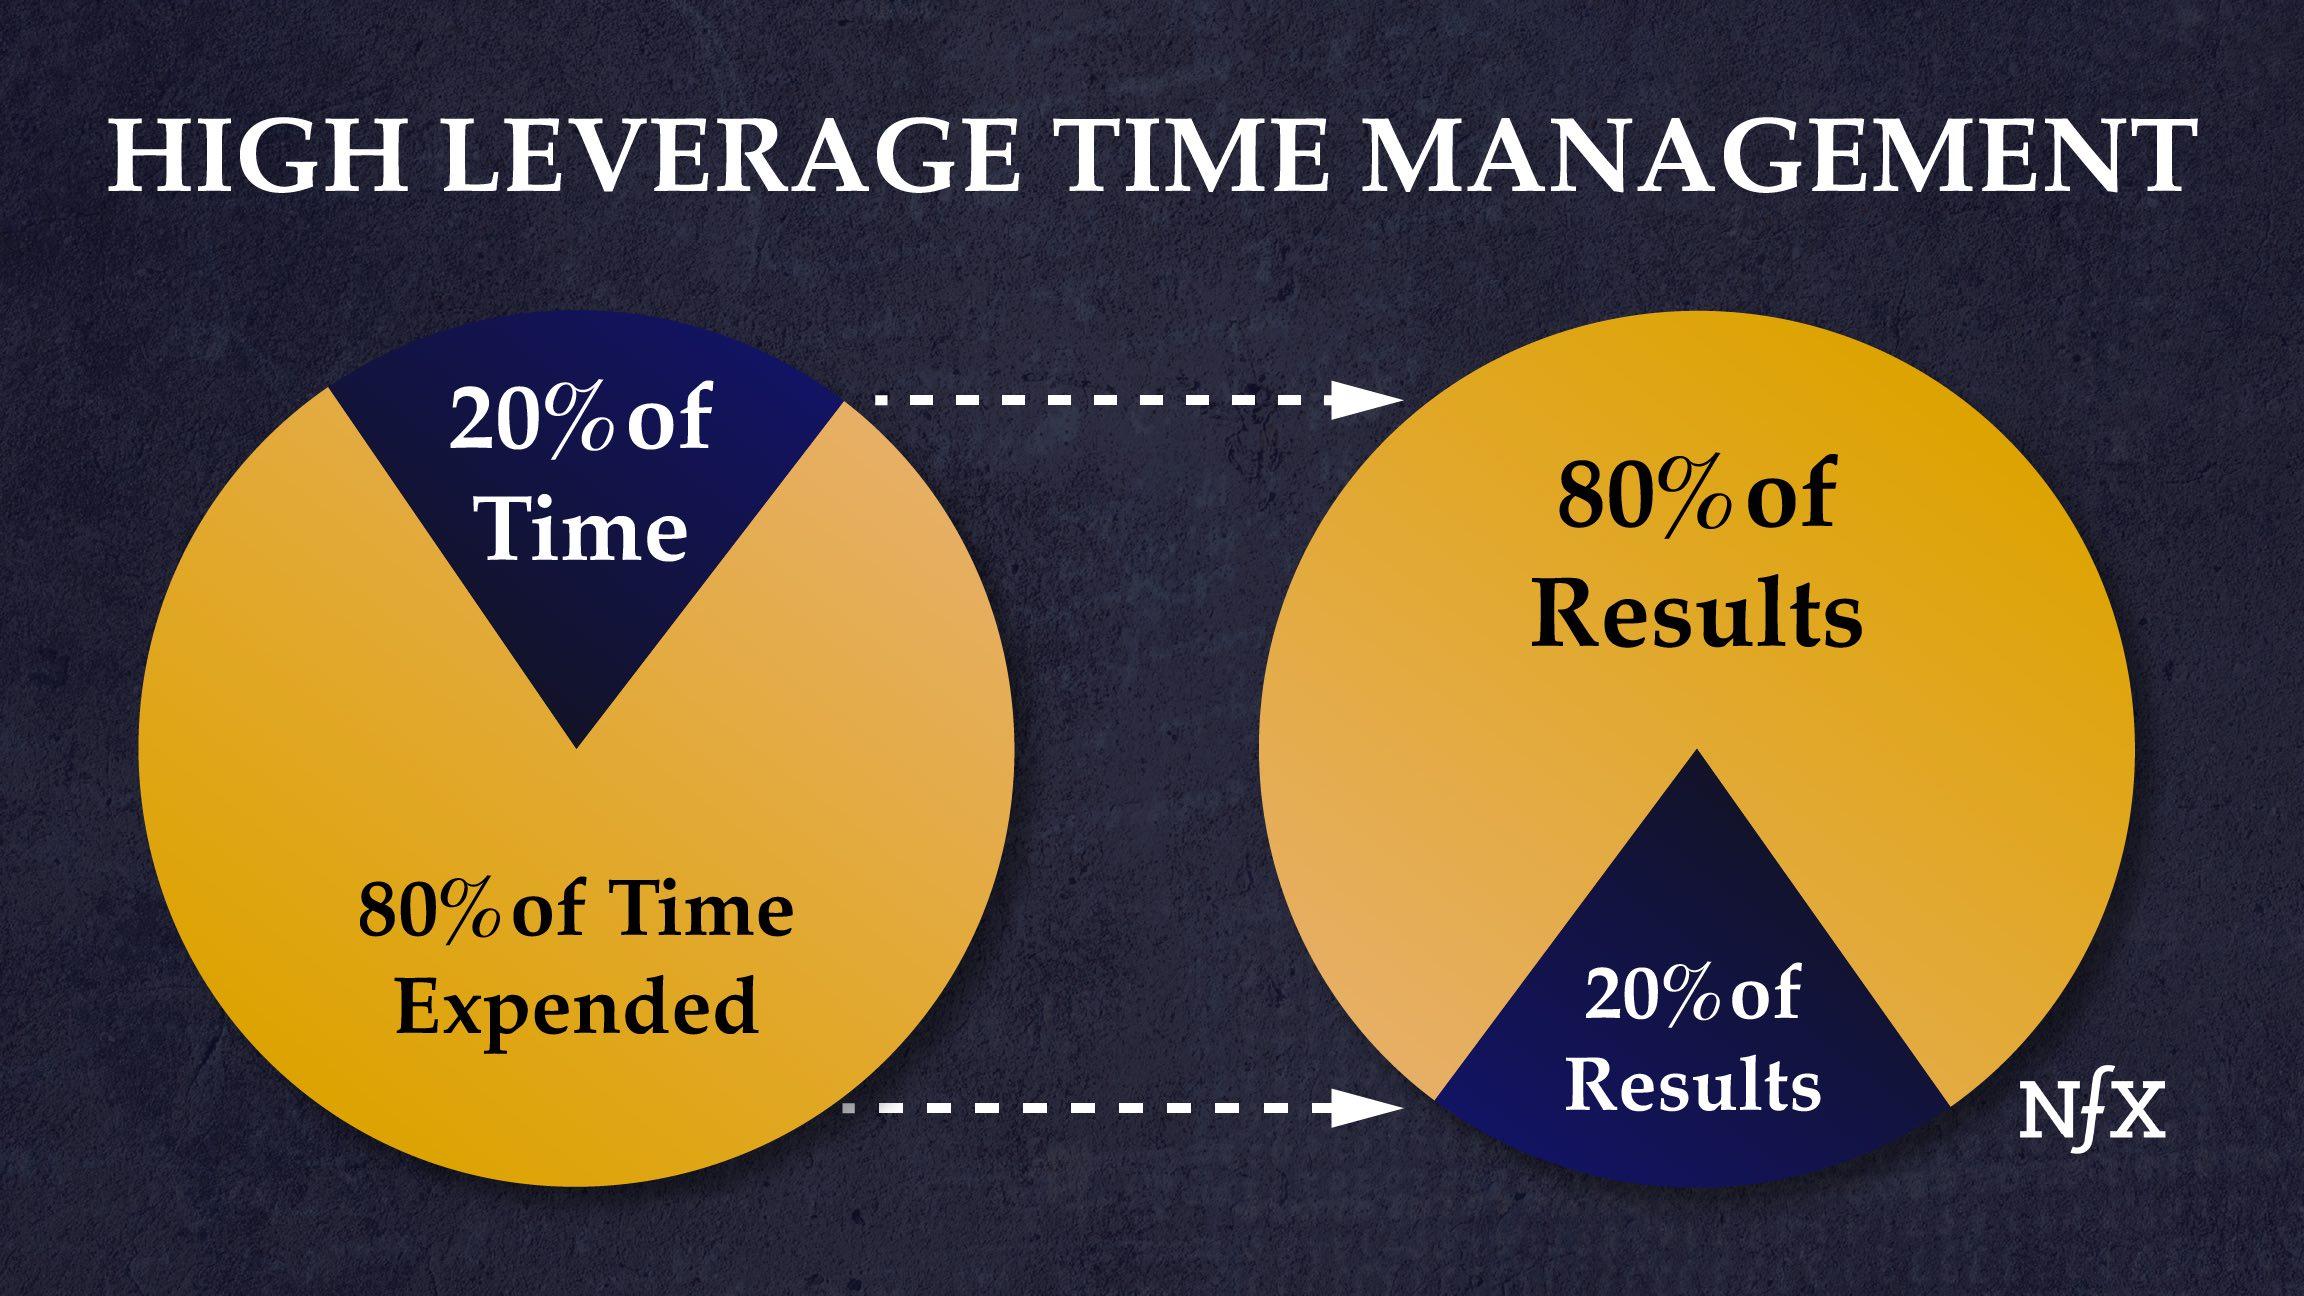 Visuals for High Leverage Time Management